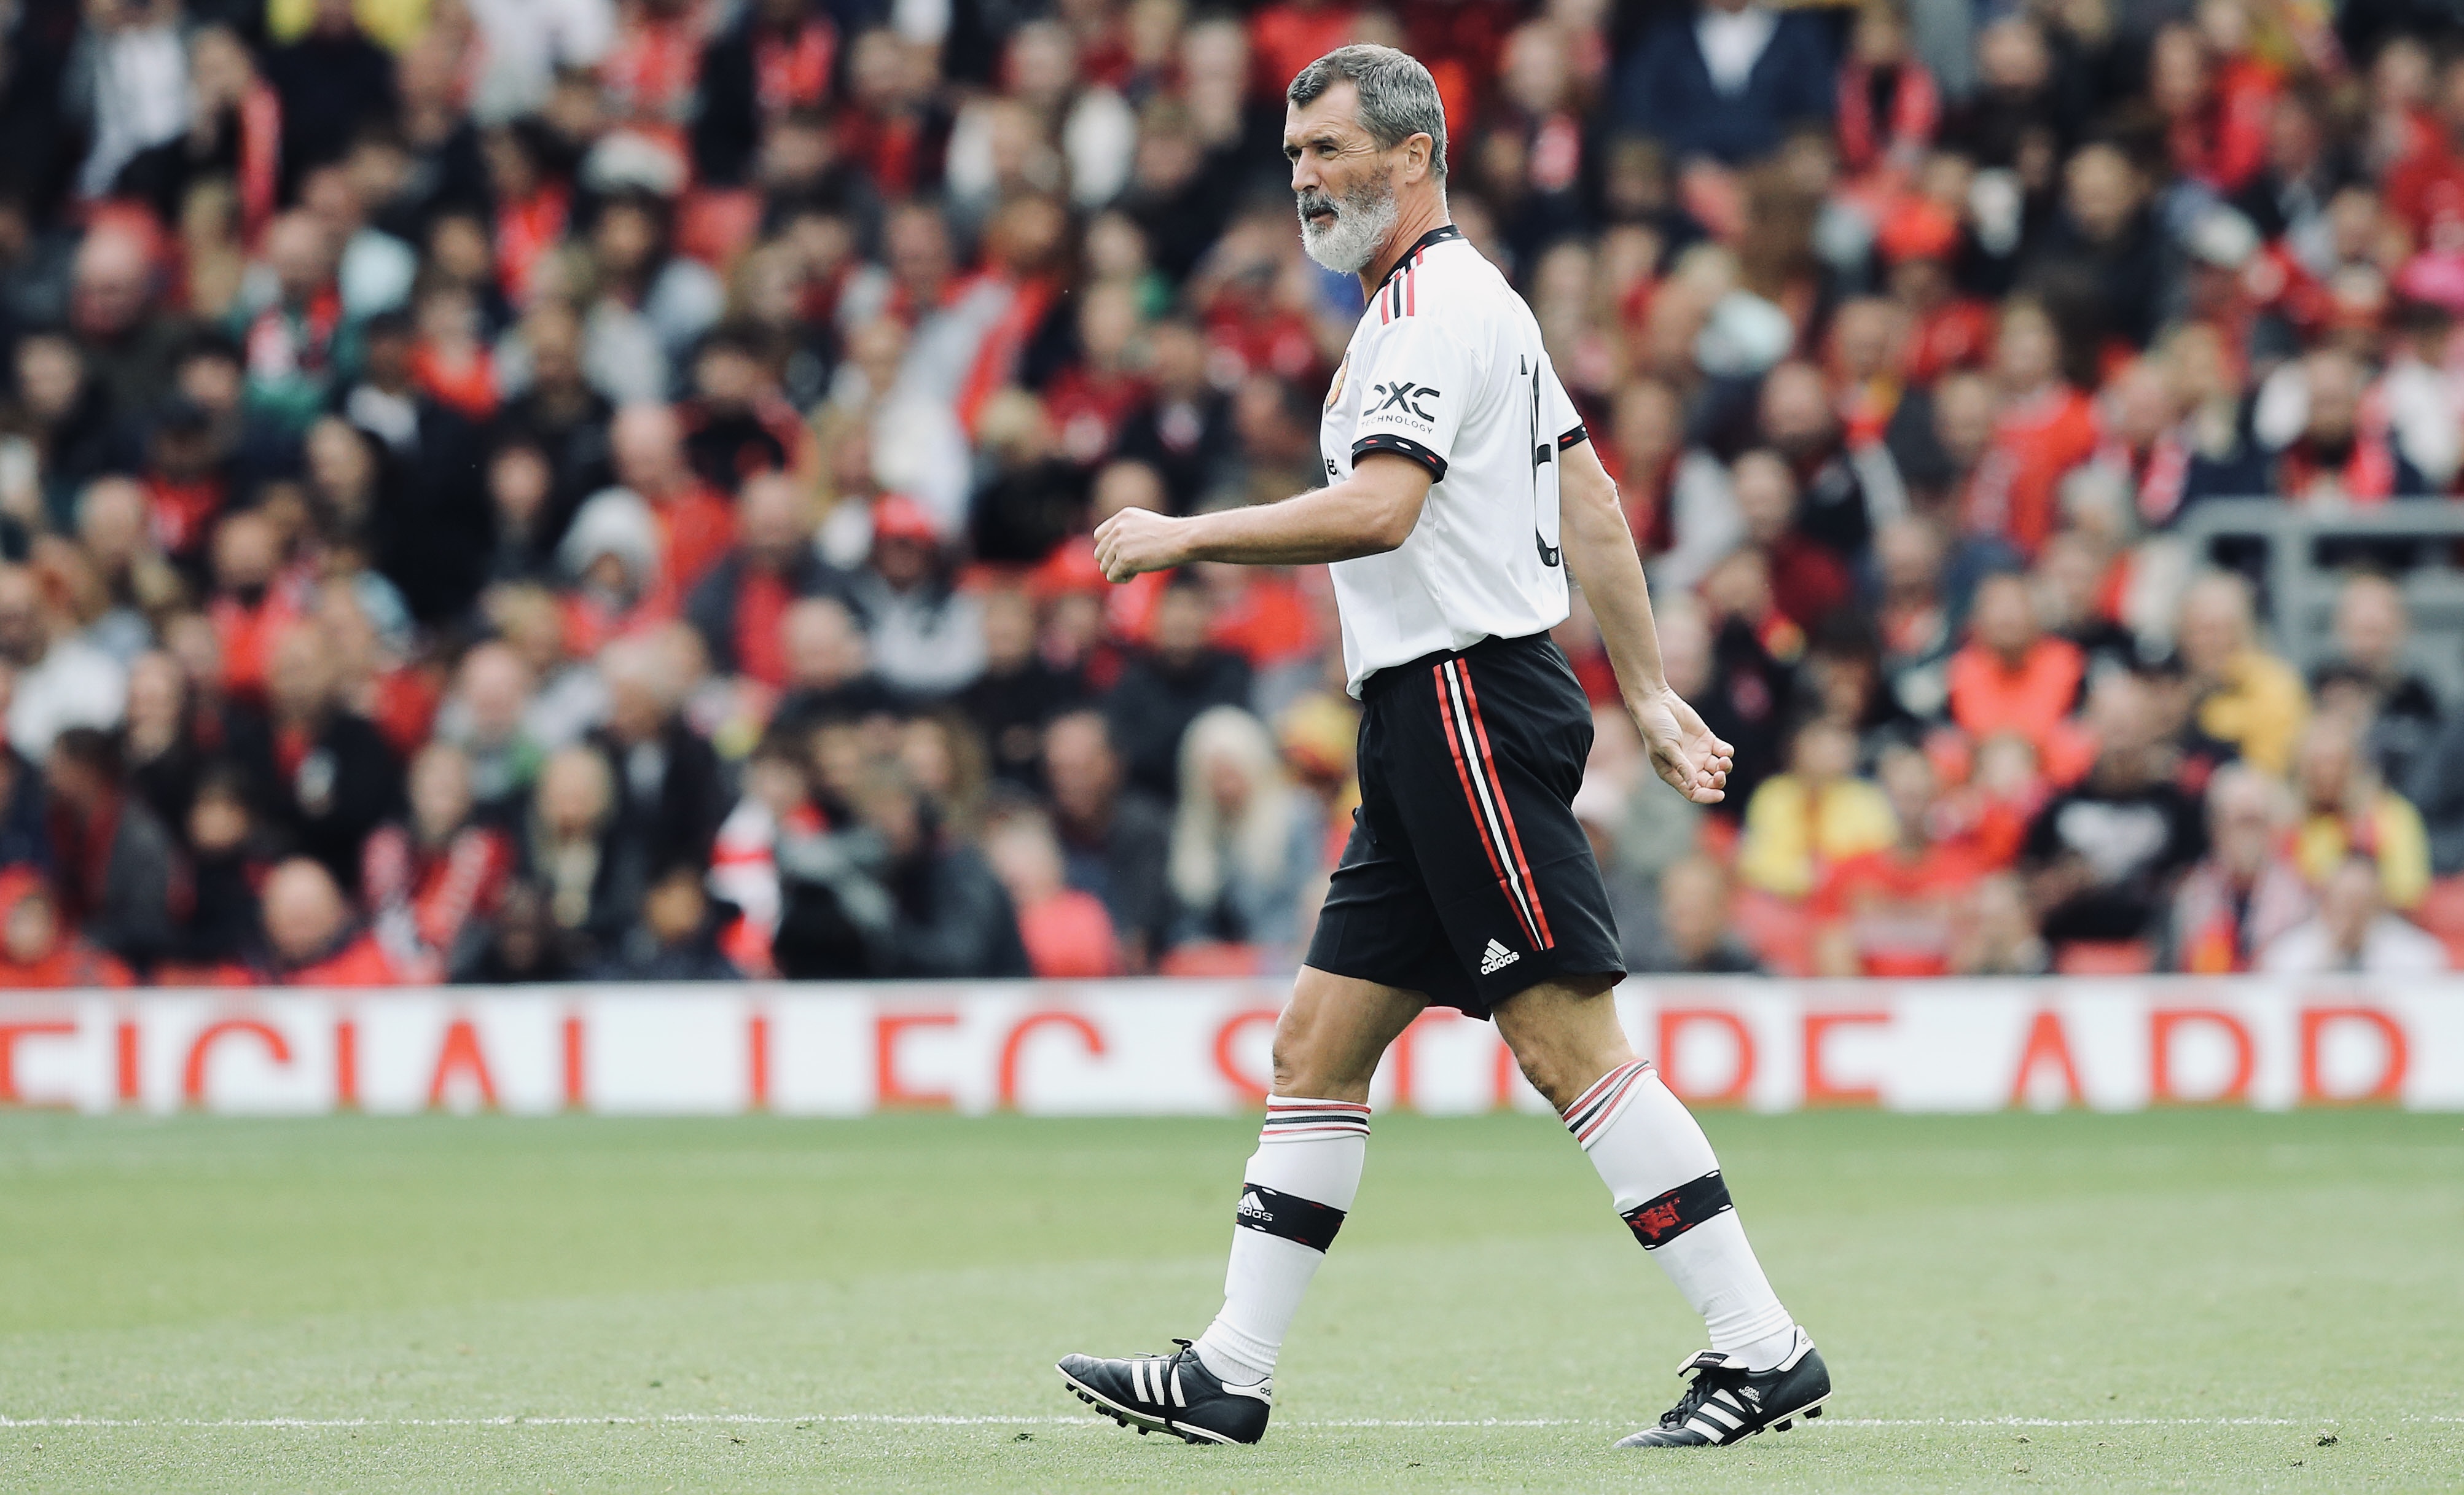 Roy Keane in action for United during the Legends of the North fixture at Anfield.